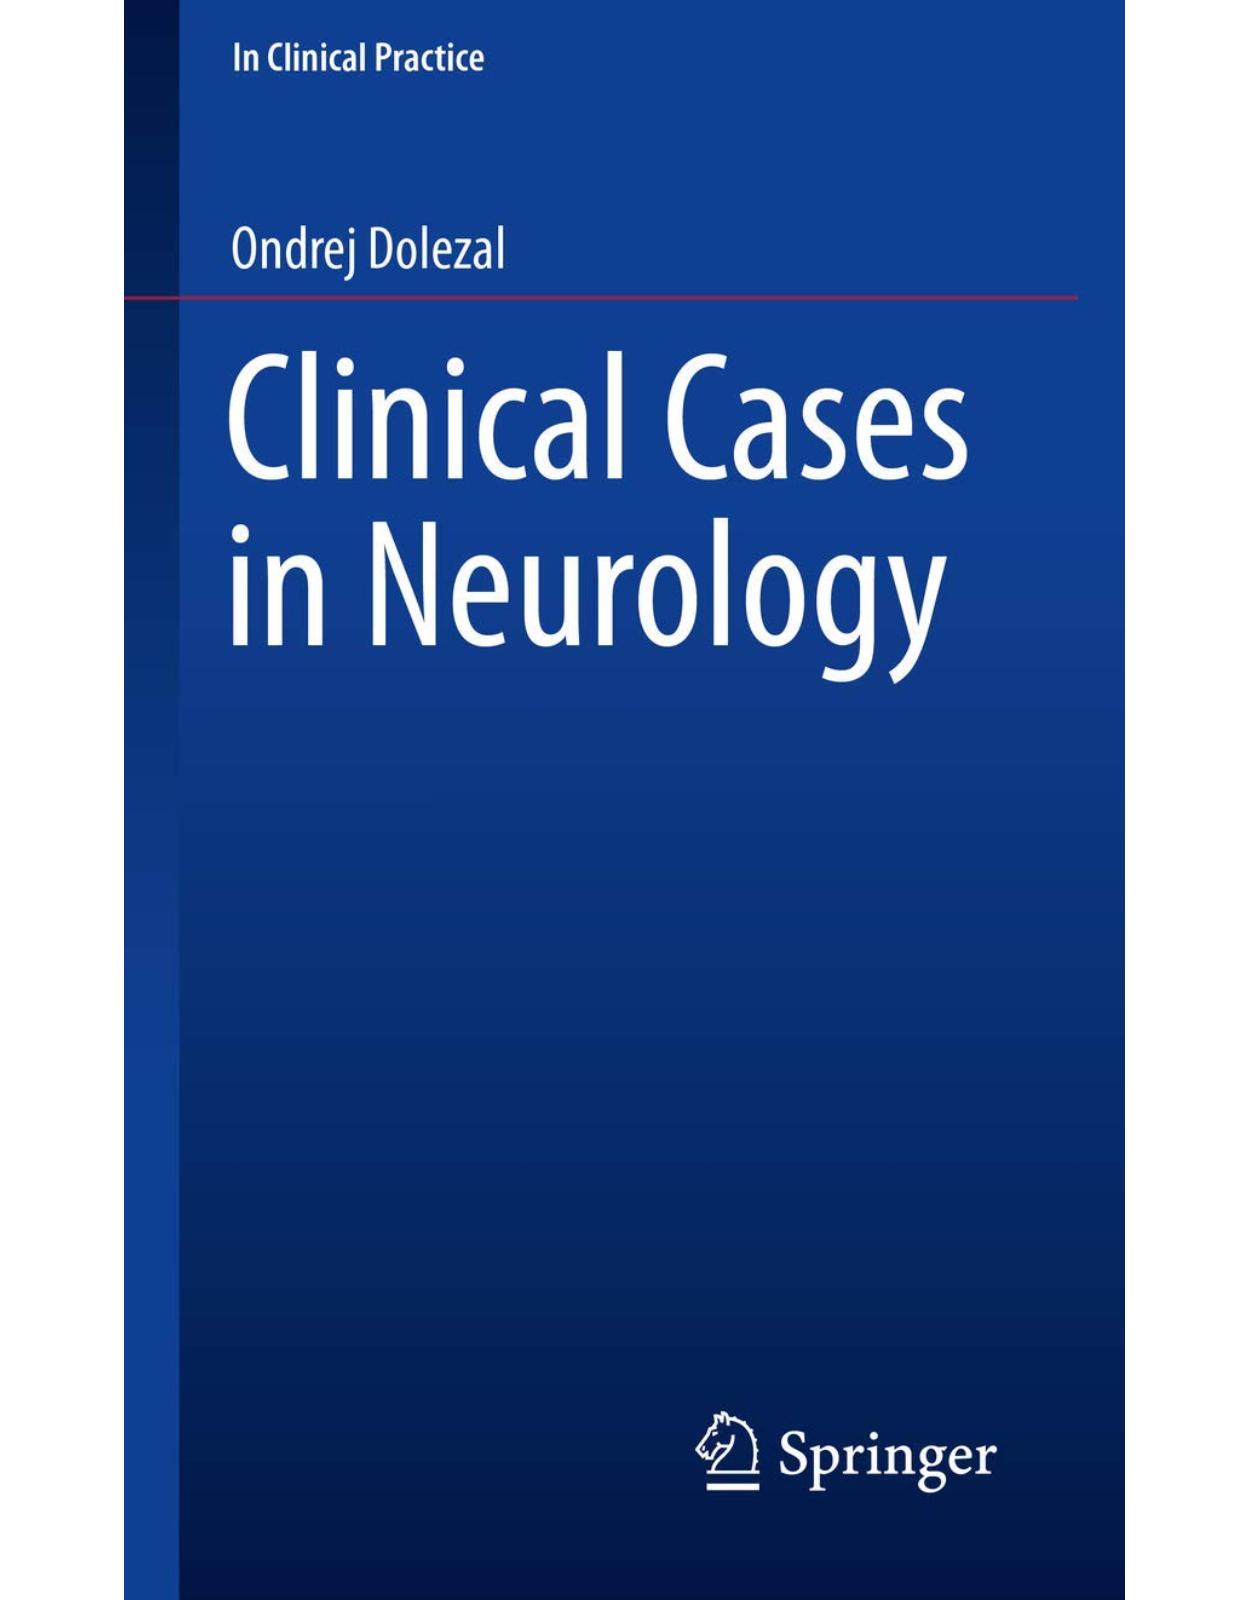 Clinical Cases in Neurology (In Clinical Practice) 